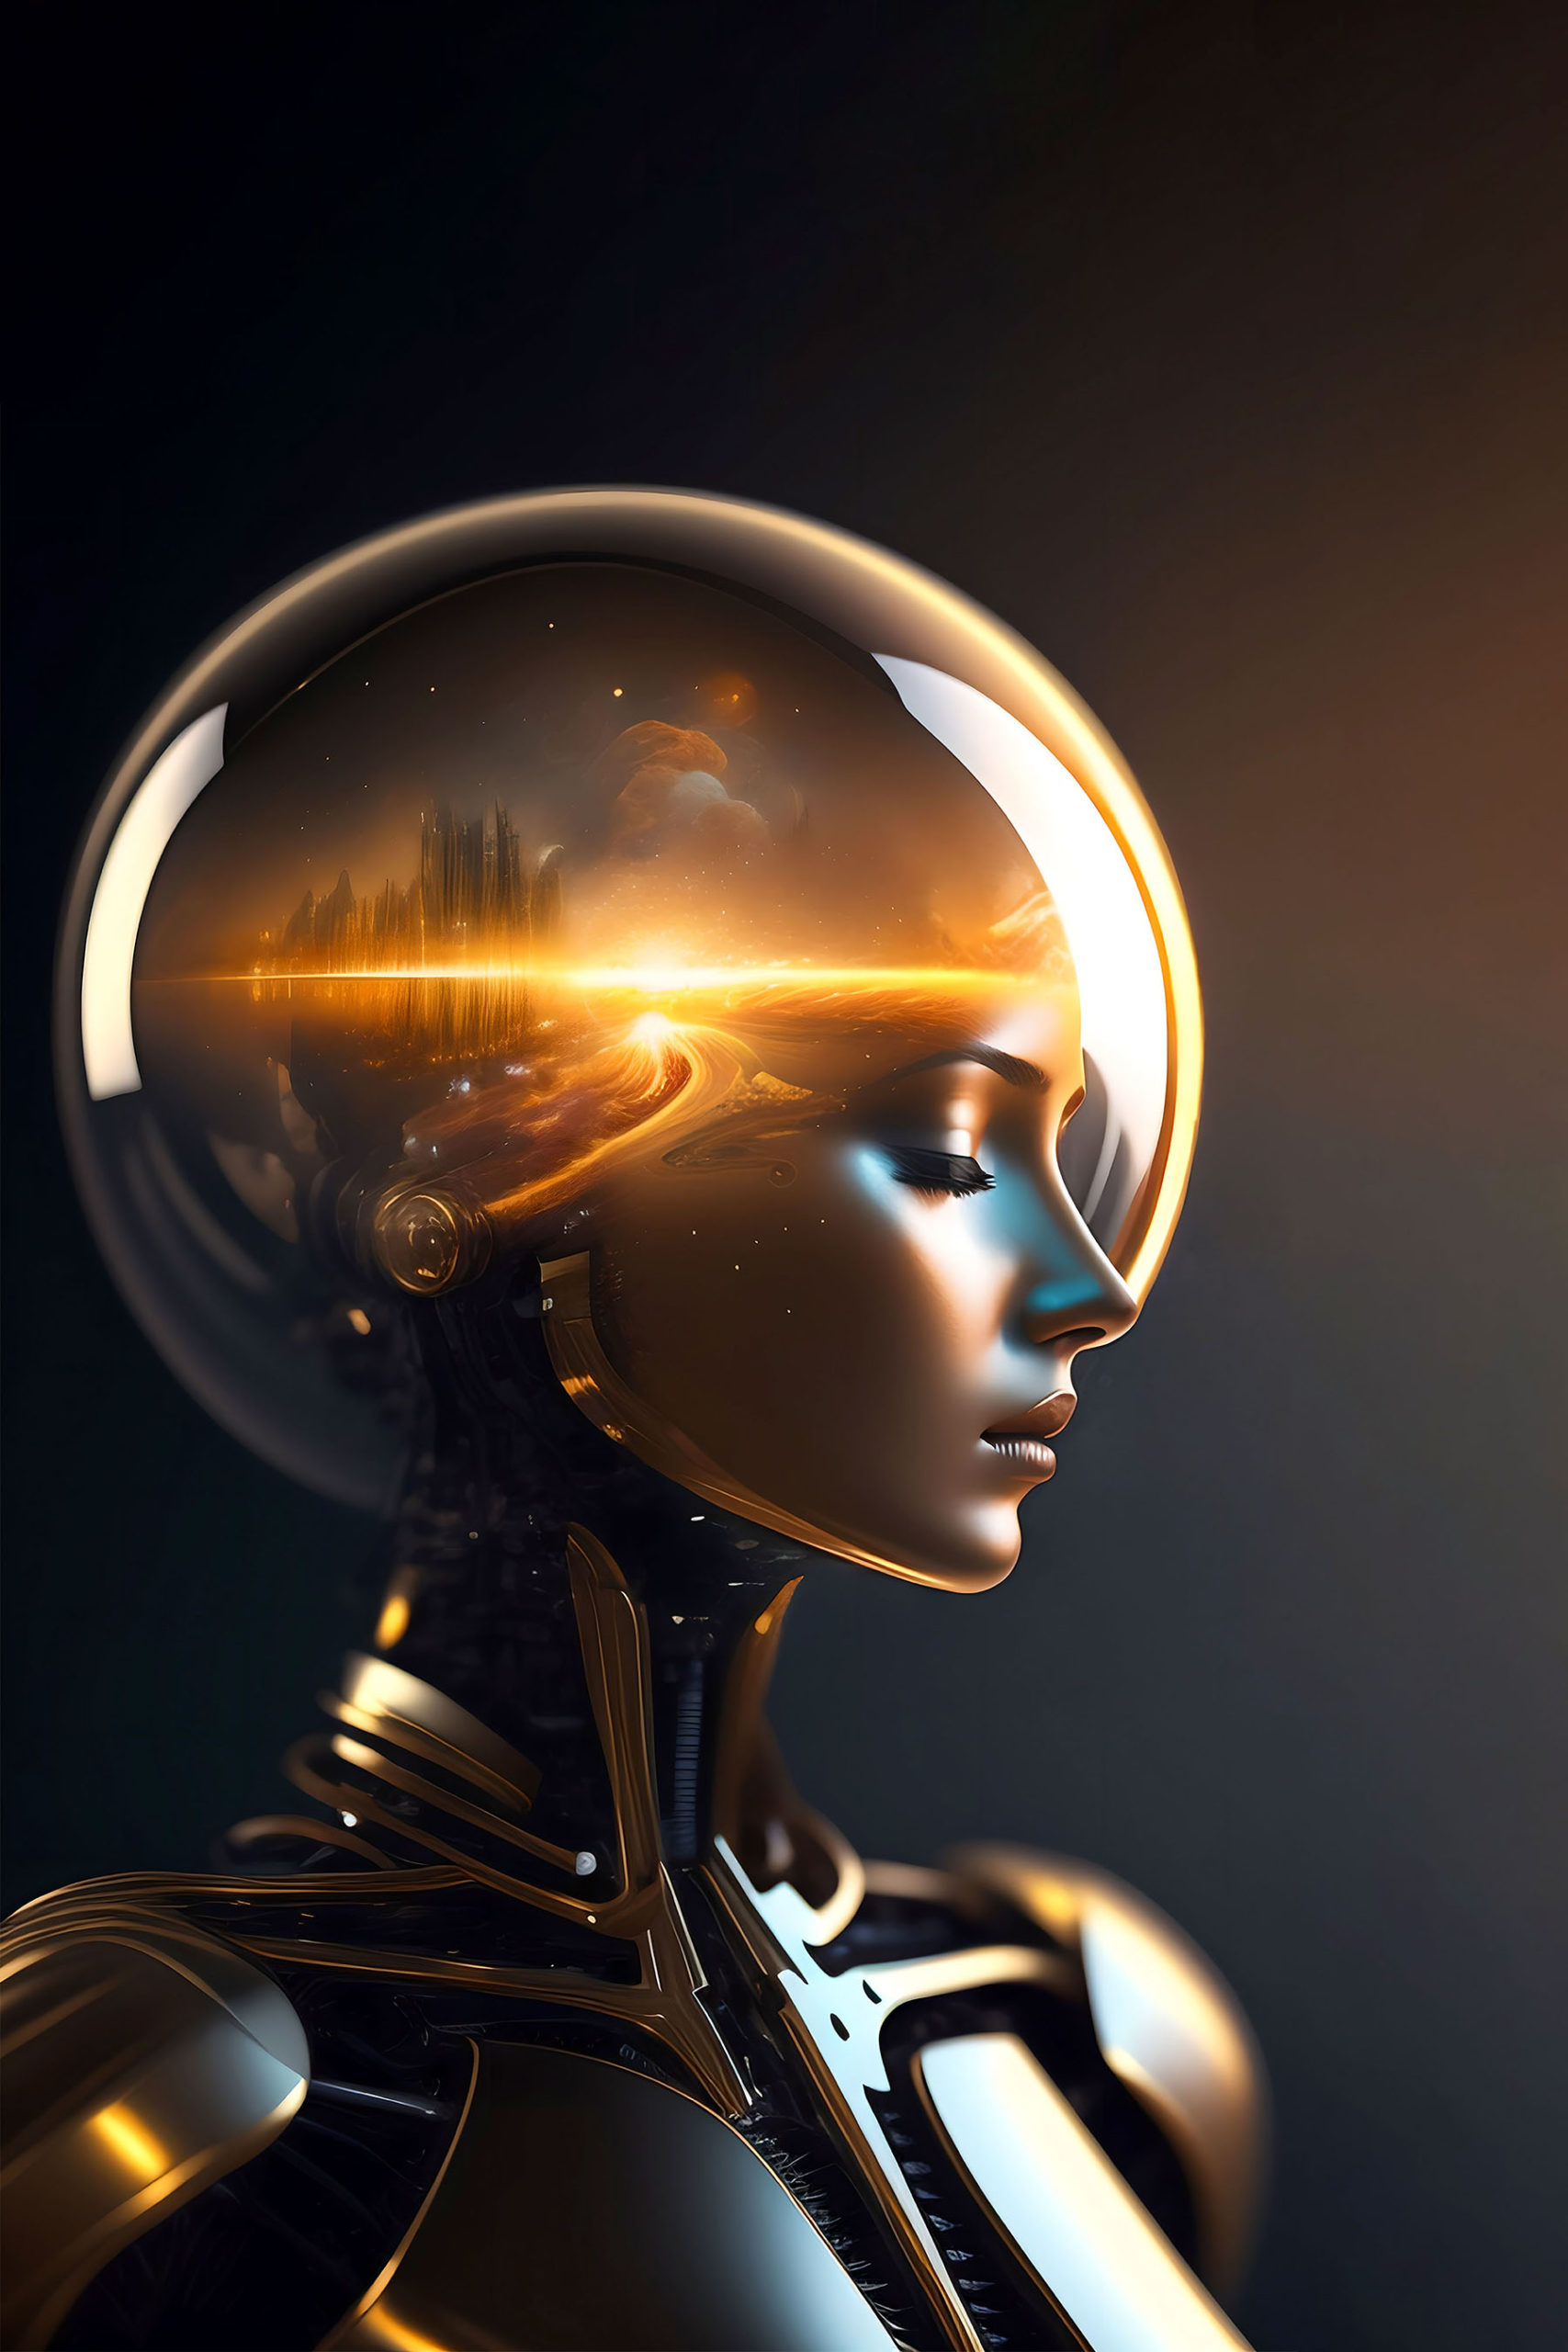 Portrait of a futuristic android with golden metallic skin against a dark background. The android has a human-like female face with a robot body. Her head is a glass sphere the contains a futuristic city in space with stars and clouds in the backdrop of the city.